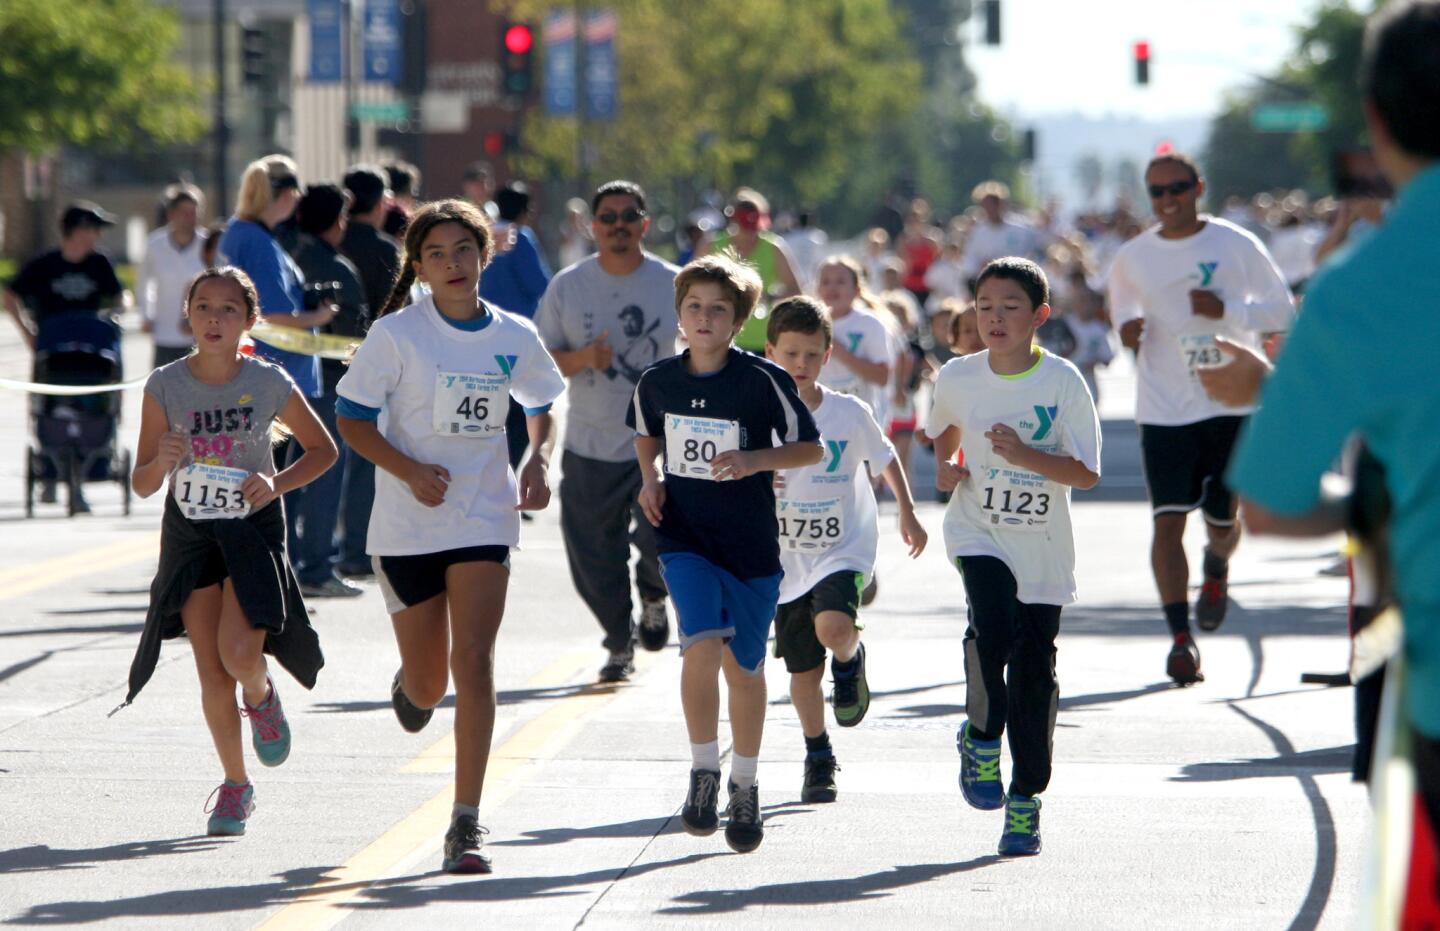 Some of the older children were the firs to finish the 5th annual Burbank Community YMCA Turkey Trot Kids Run in Burbank on Thursday, Nov. 27, 2014.